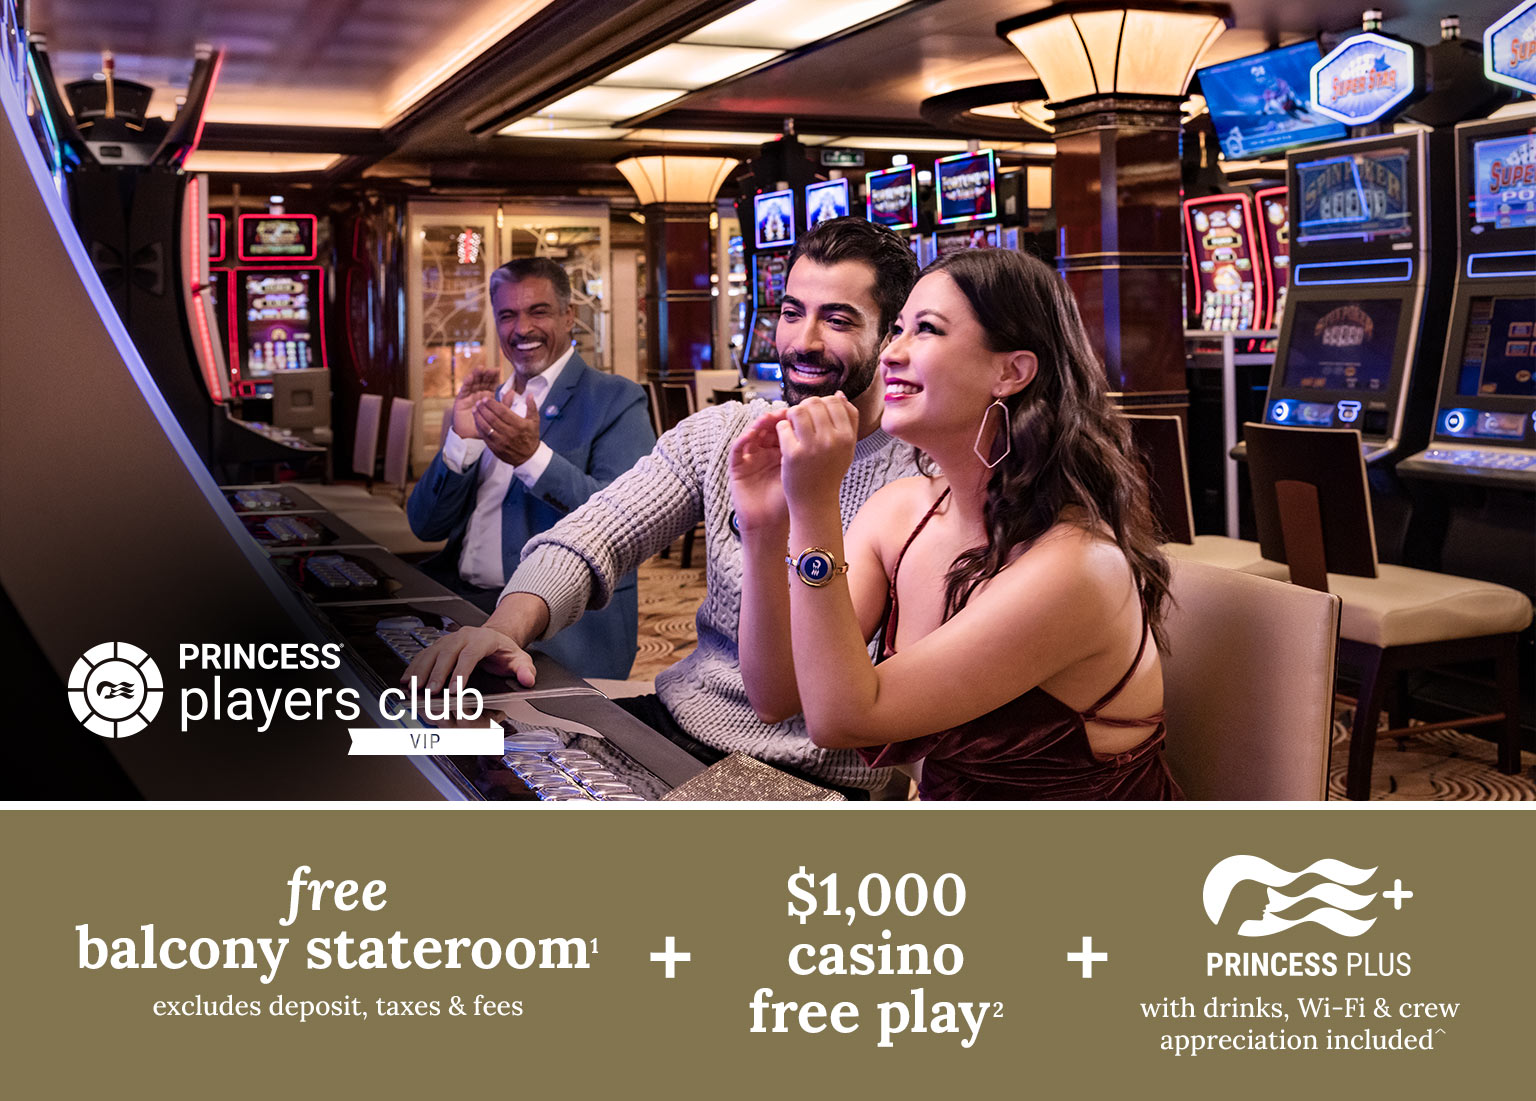 Free balcony stateroom + $1,000 casino free play + Princess Plus with free drinks, Wi-Fi & crew appreciation included. Click here to book.